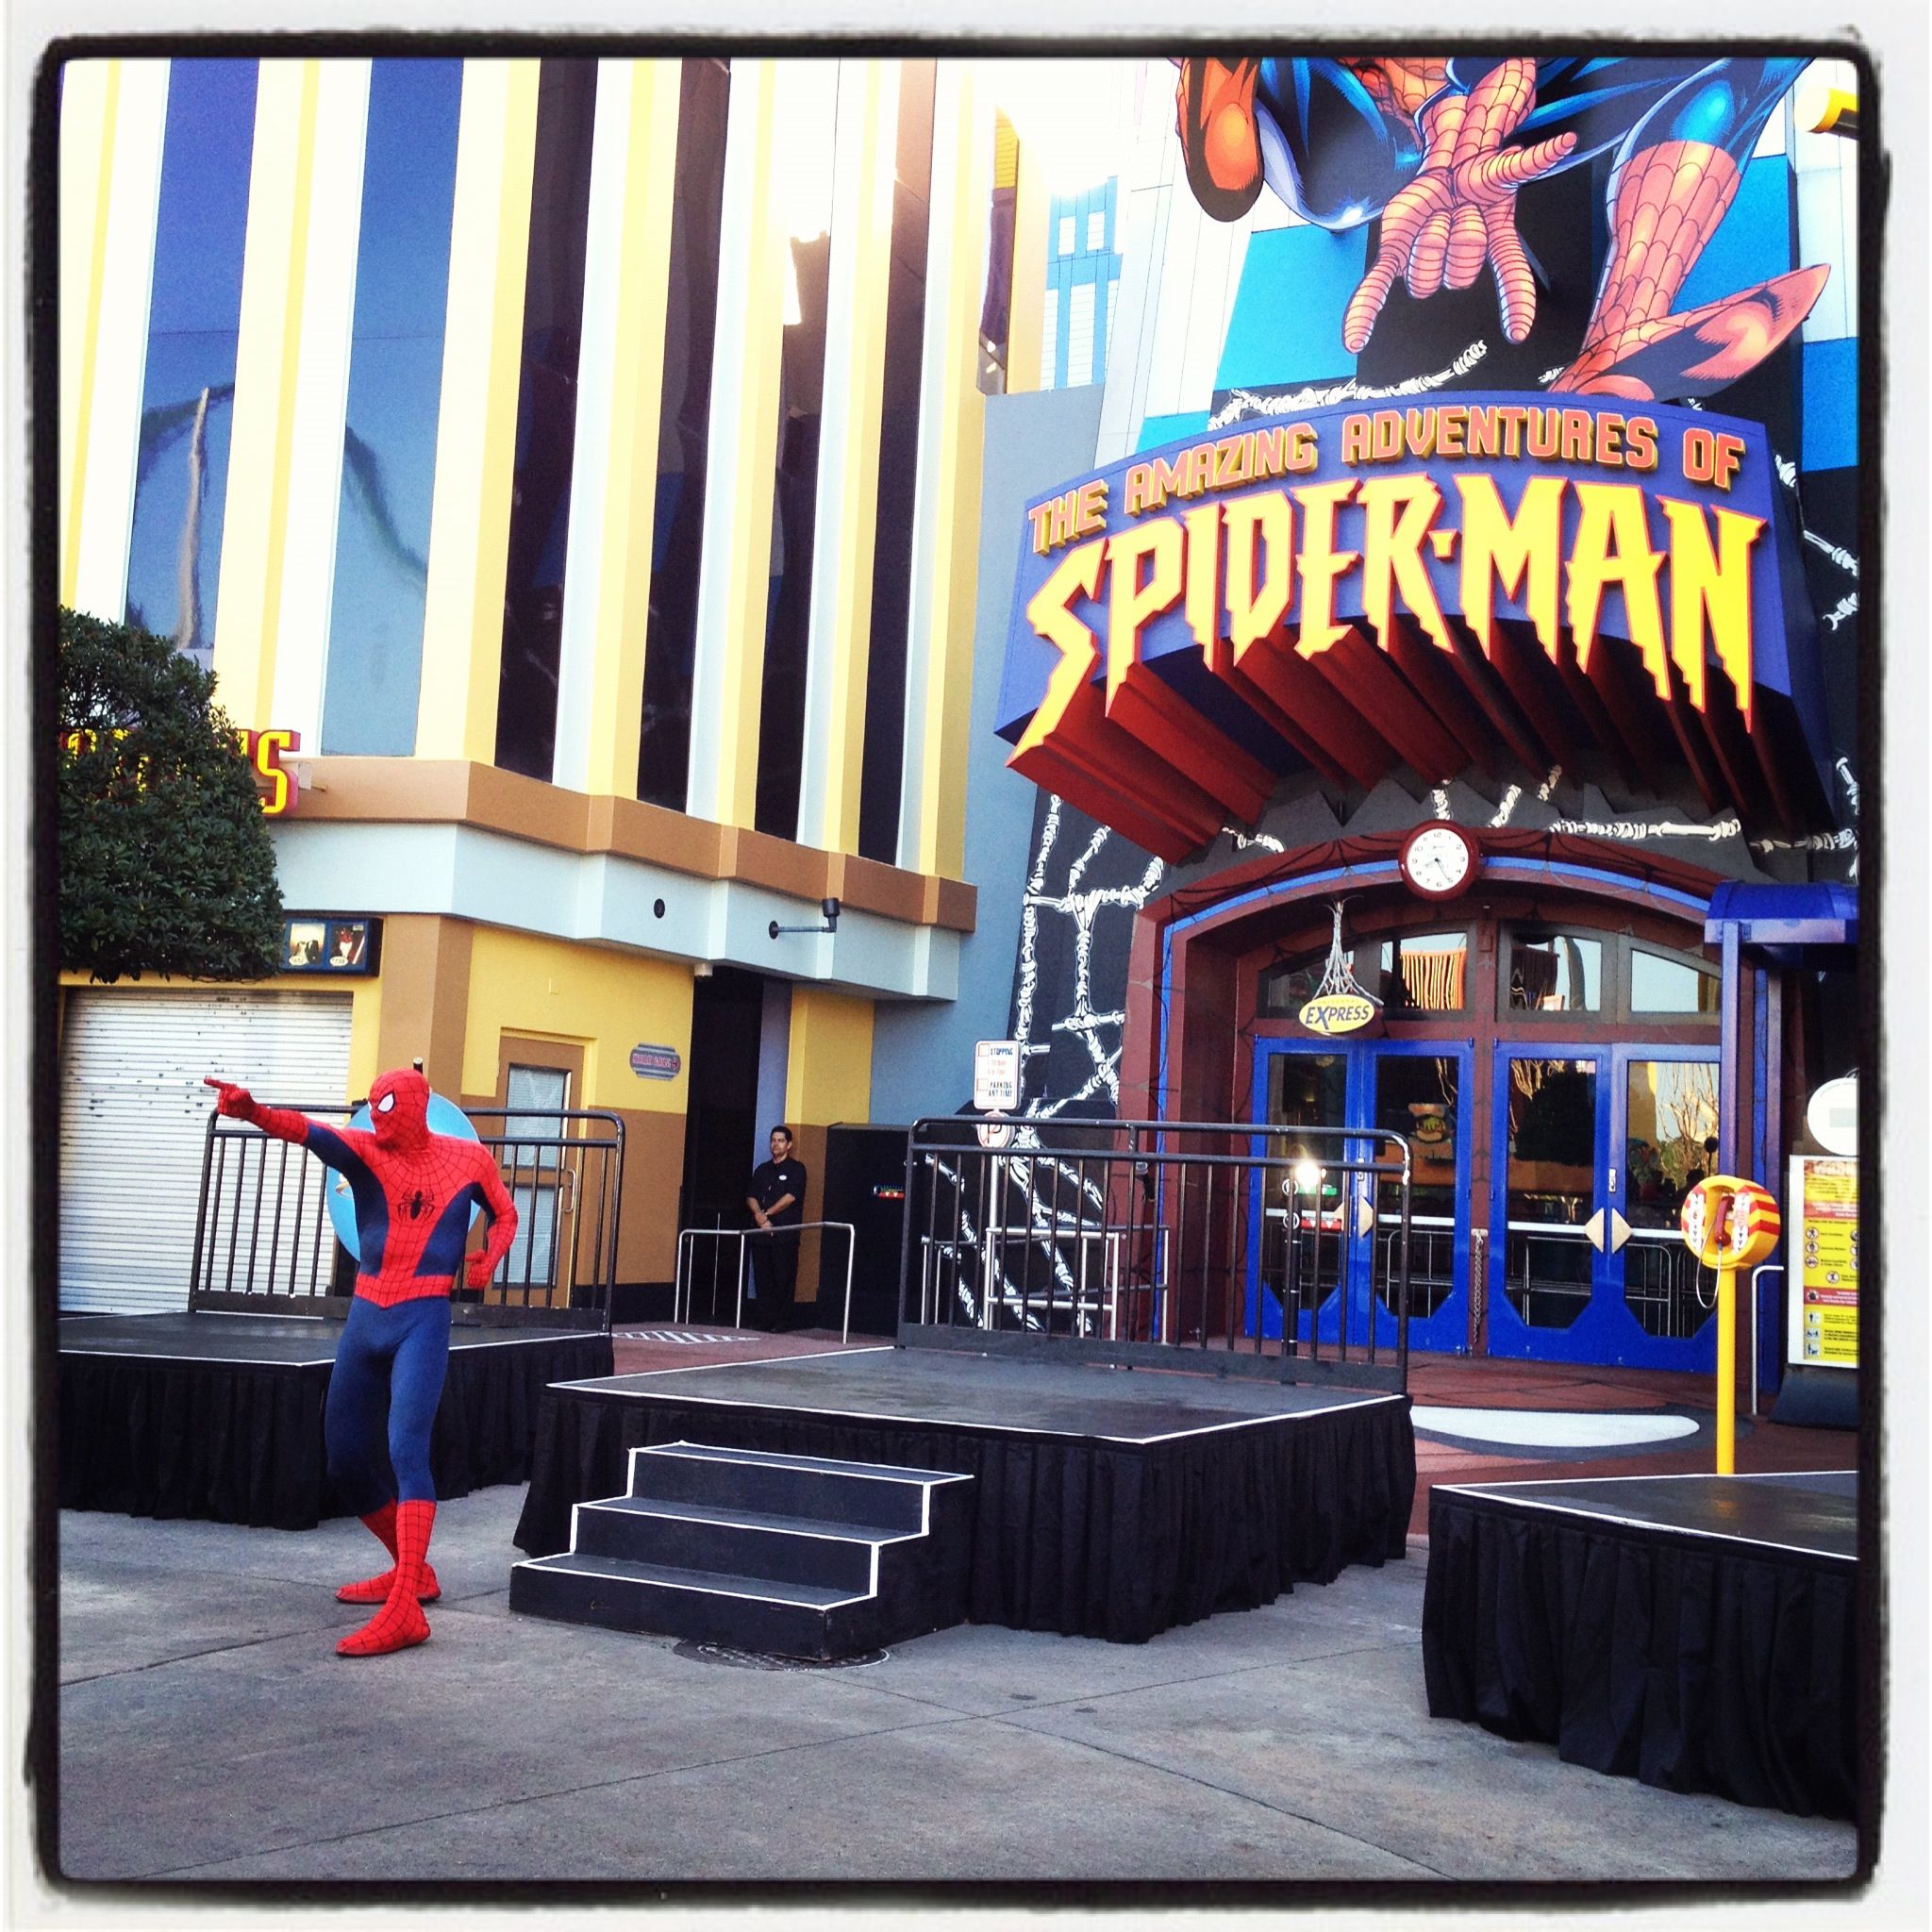 Islands of Adventure: Reopening Ceremony For The Spider-Man Ride